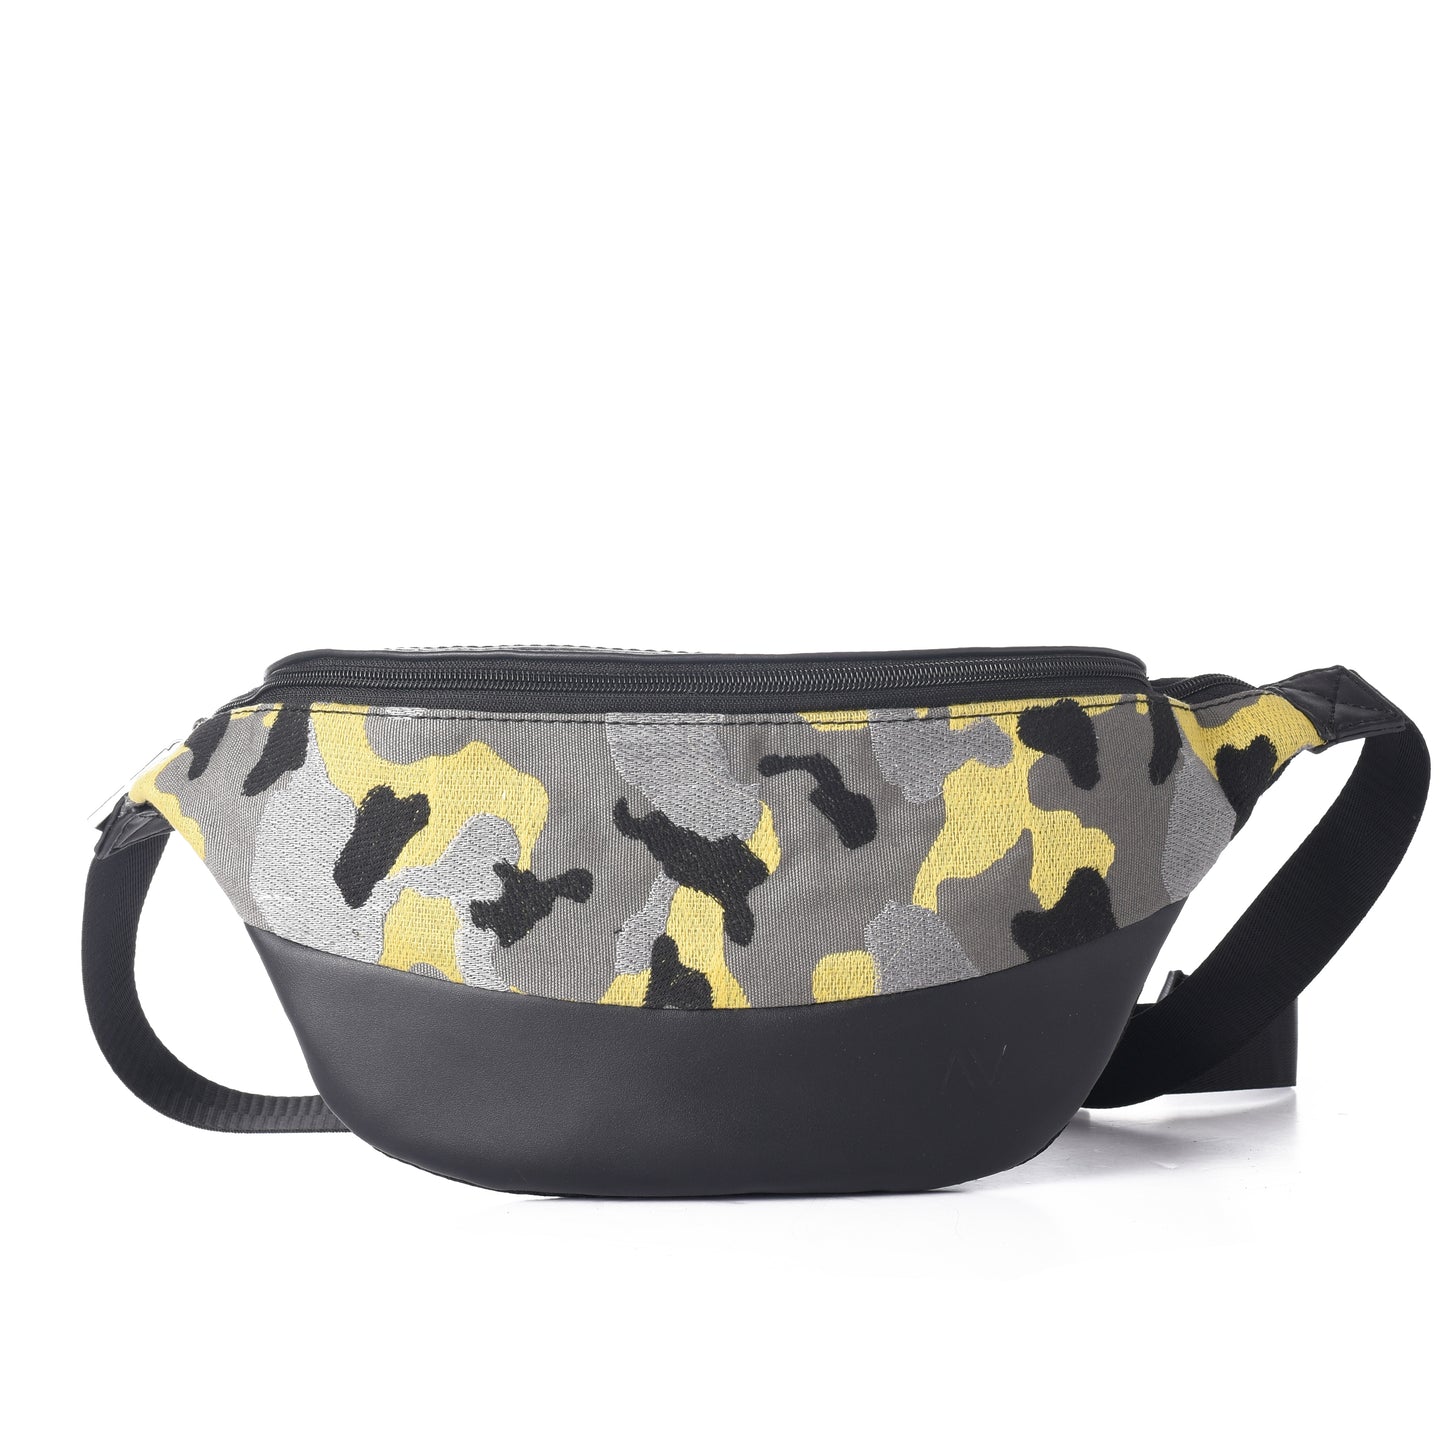 Fanny pack - Black with Yellow Army pattern